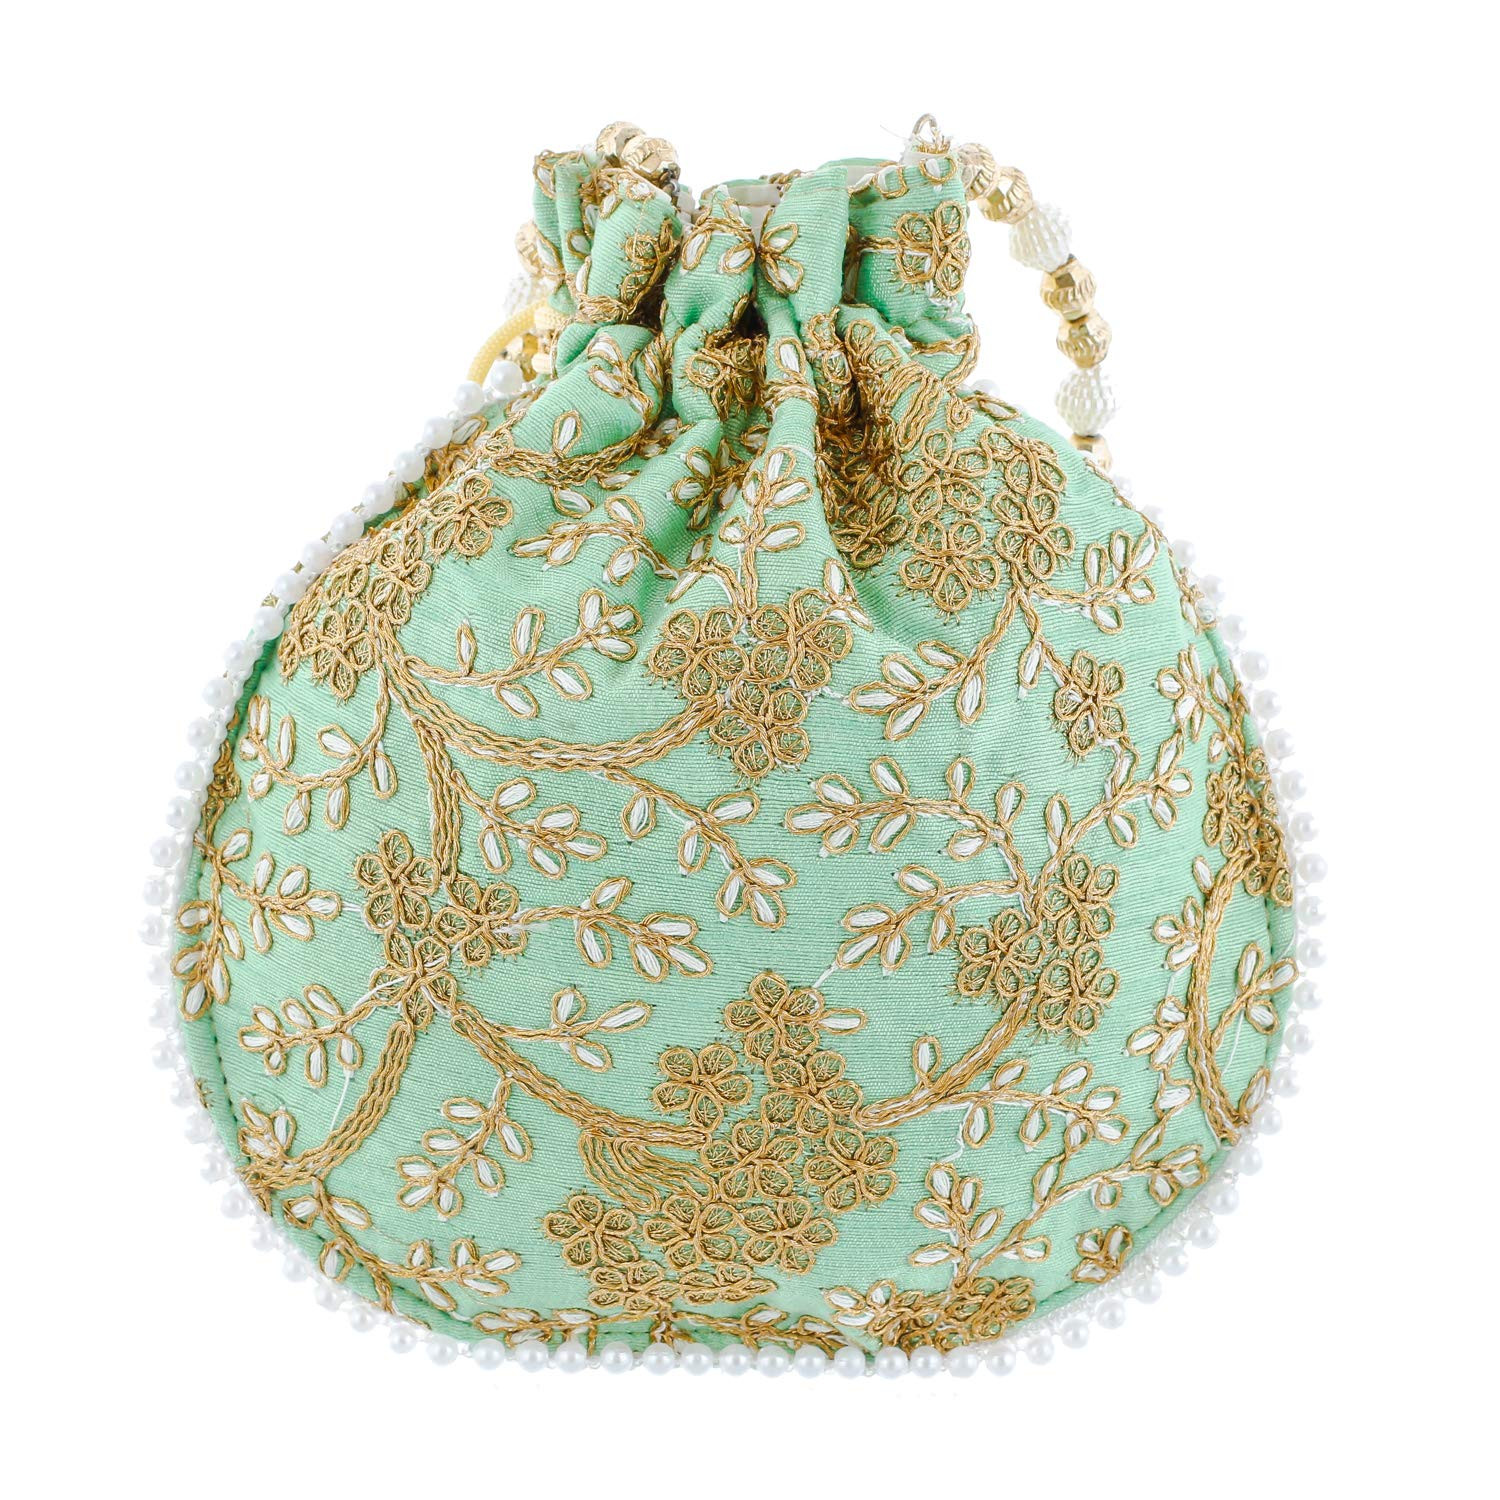 Kuber Industries Embroidery Drawstring Potli|Hand Purse With Gold Pearl Border & Handle For Woman,Girls Pack of 2 (Green & Light Pink)